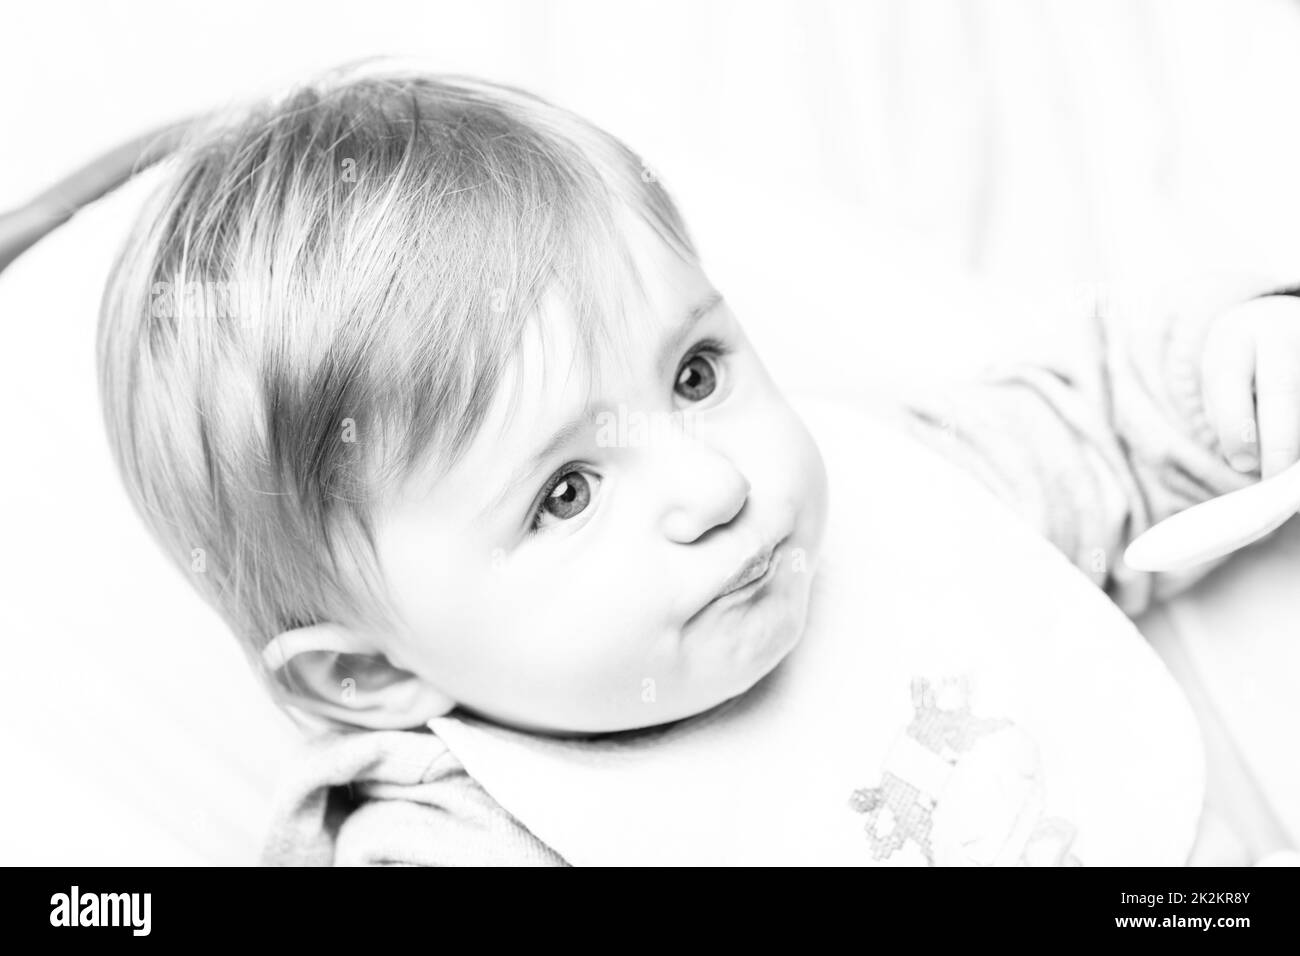 infant girl black and white candid portrait Stock Photo